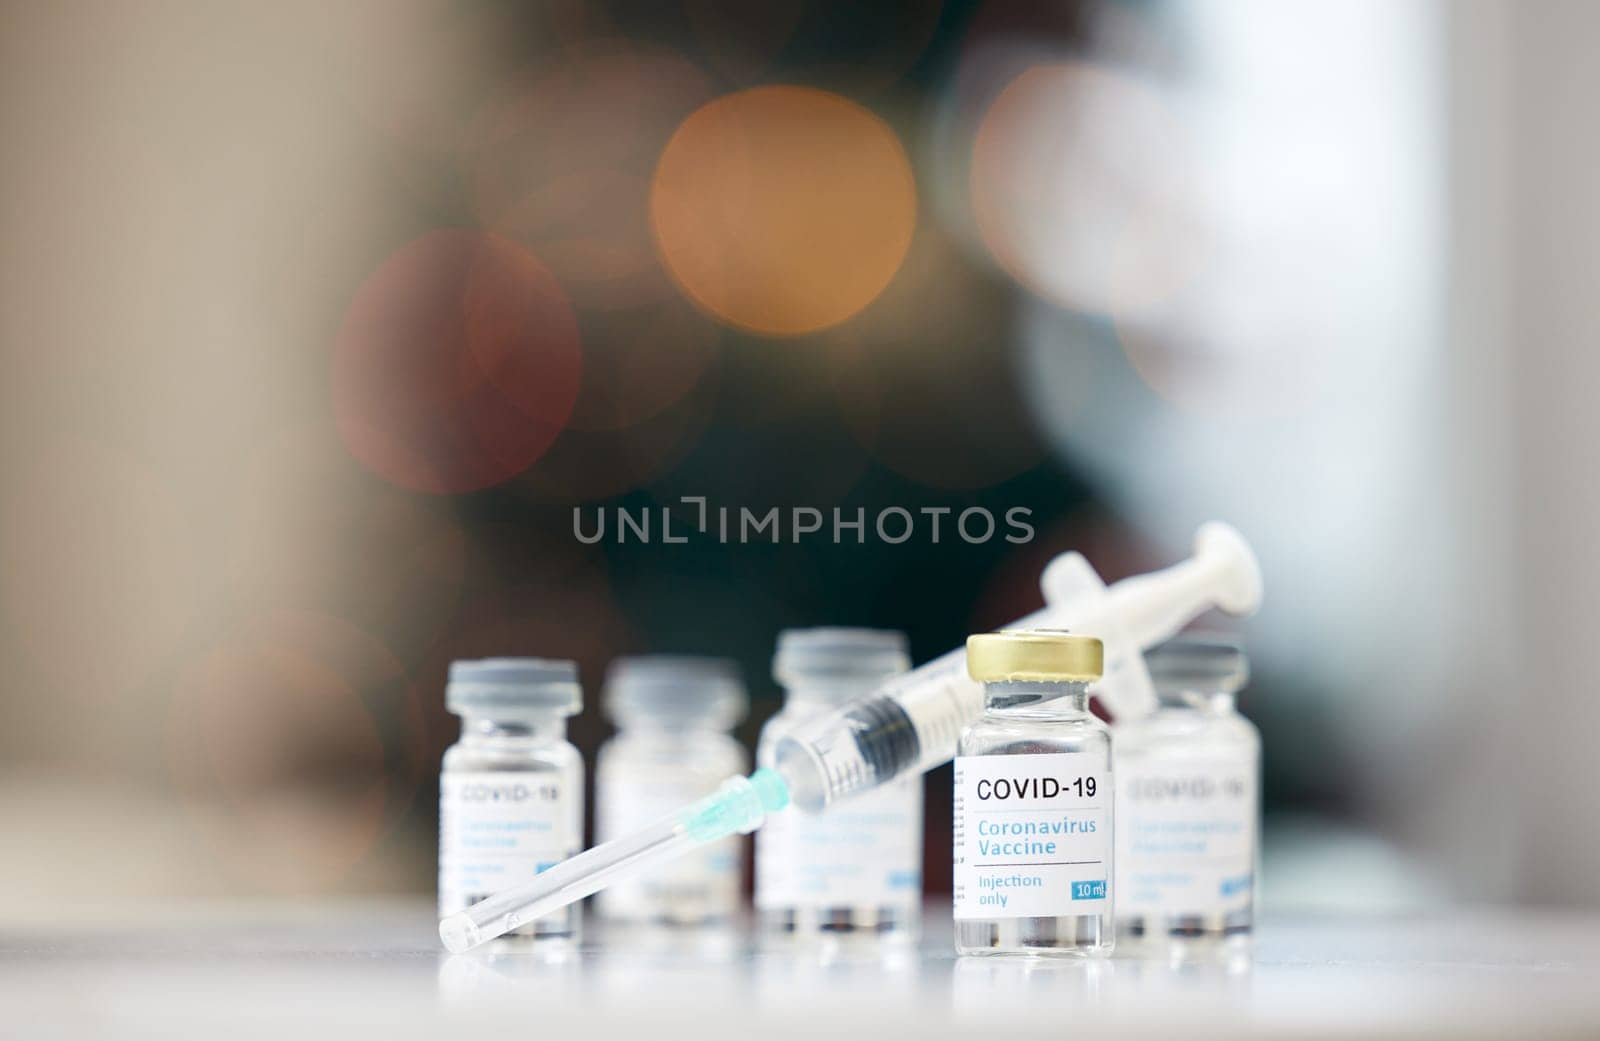 Covid vaccine, syringe and and table for medical, health and wellness for pandemic safety. Medicine, vial and needle for corona, drug and risk control for disease treatment and pharmaceutical product.